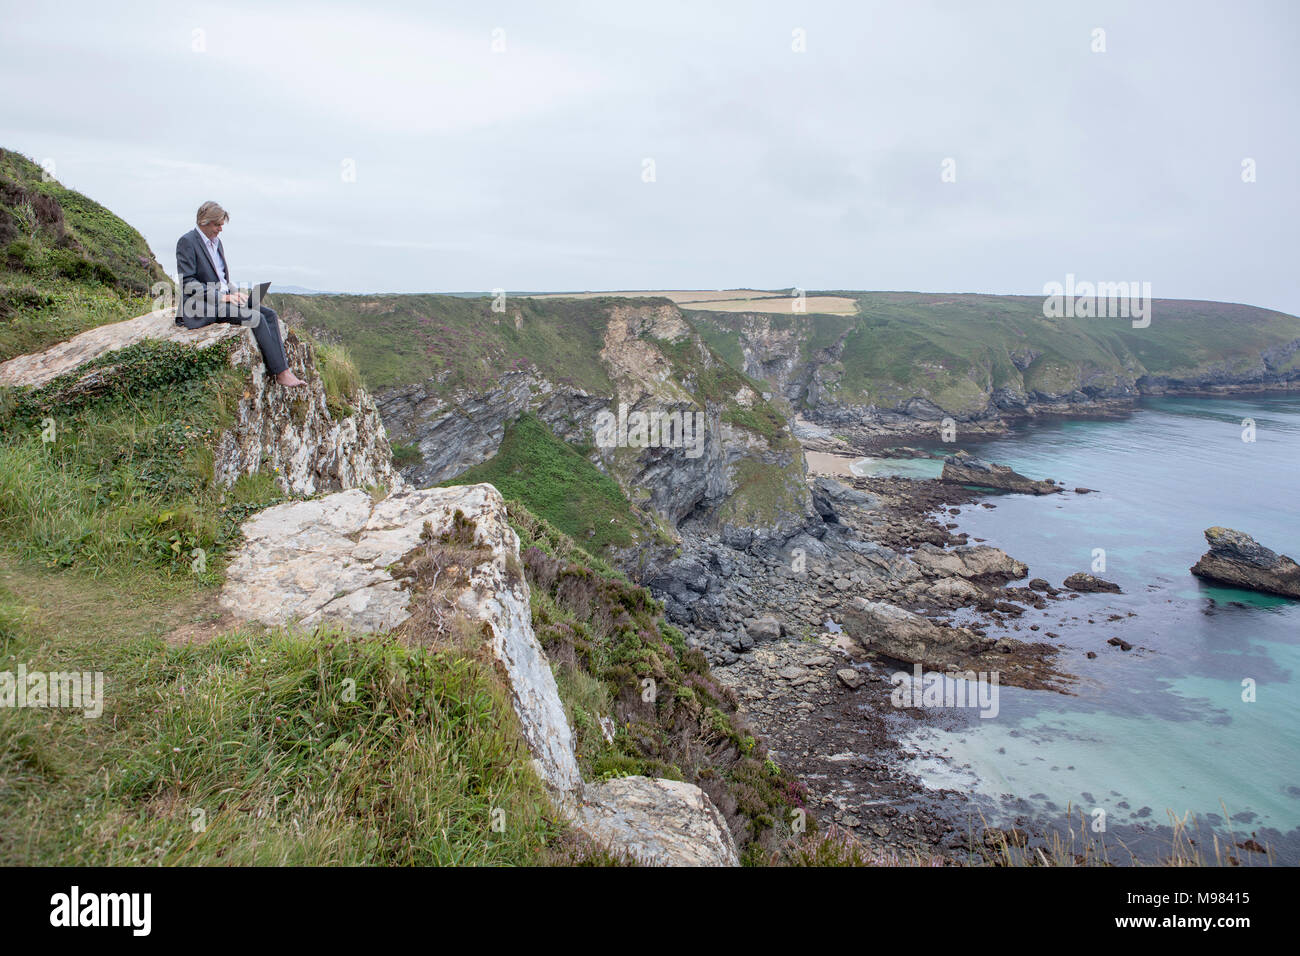 UK, Cornwall, Gwithian, businessman sitting at the coast using laptop Banque D'Images